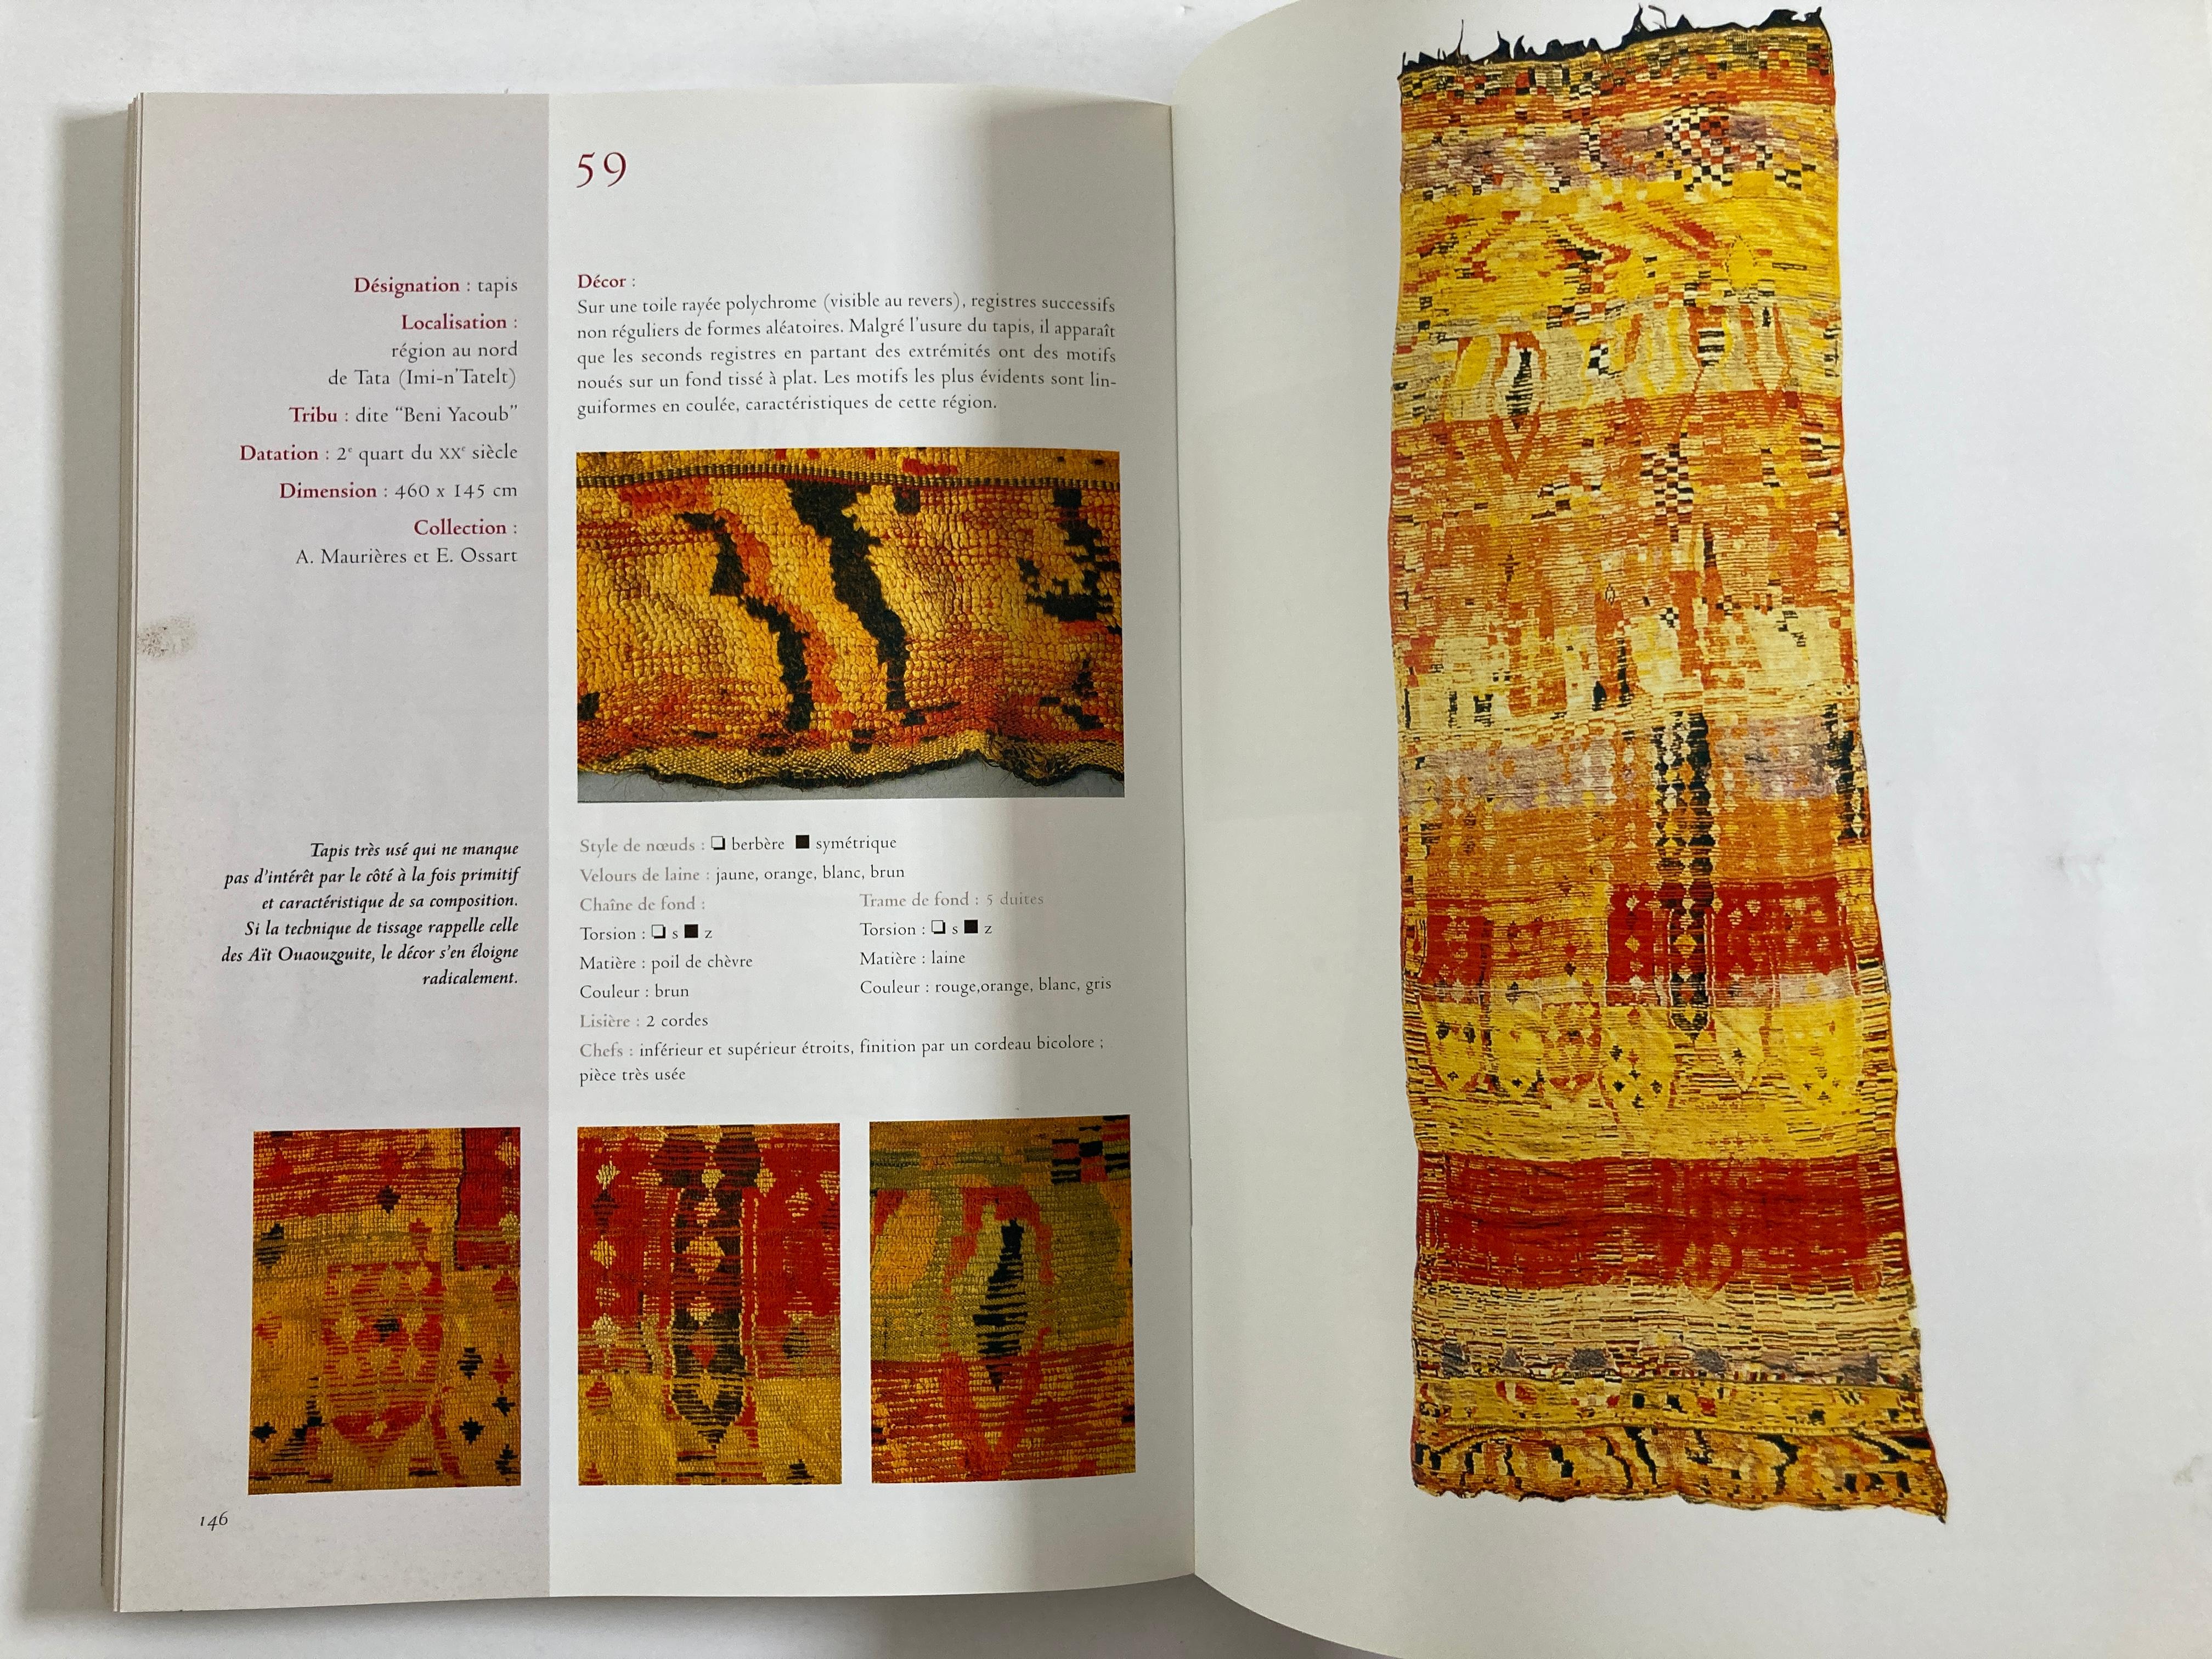 Maroc Tapis de tribus 'French' Moroccan Tribal Rugs Paperback Book For Sale 3